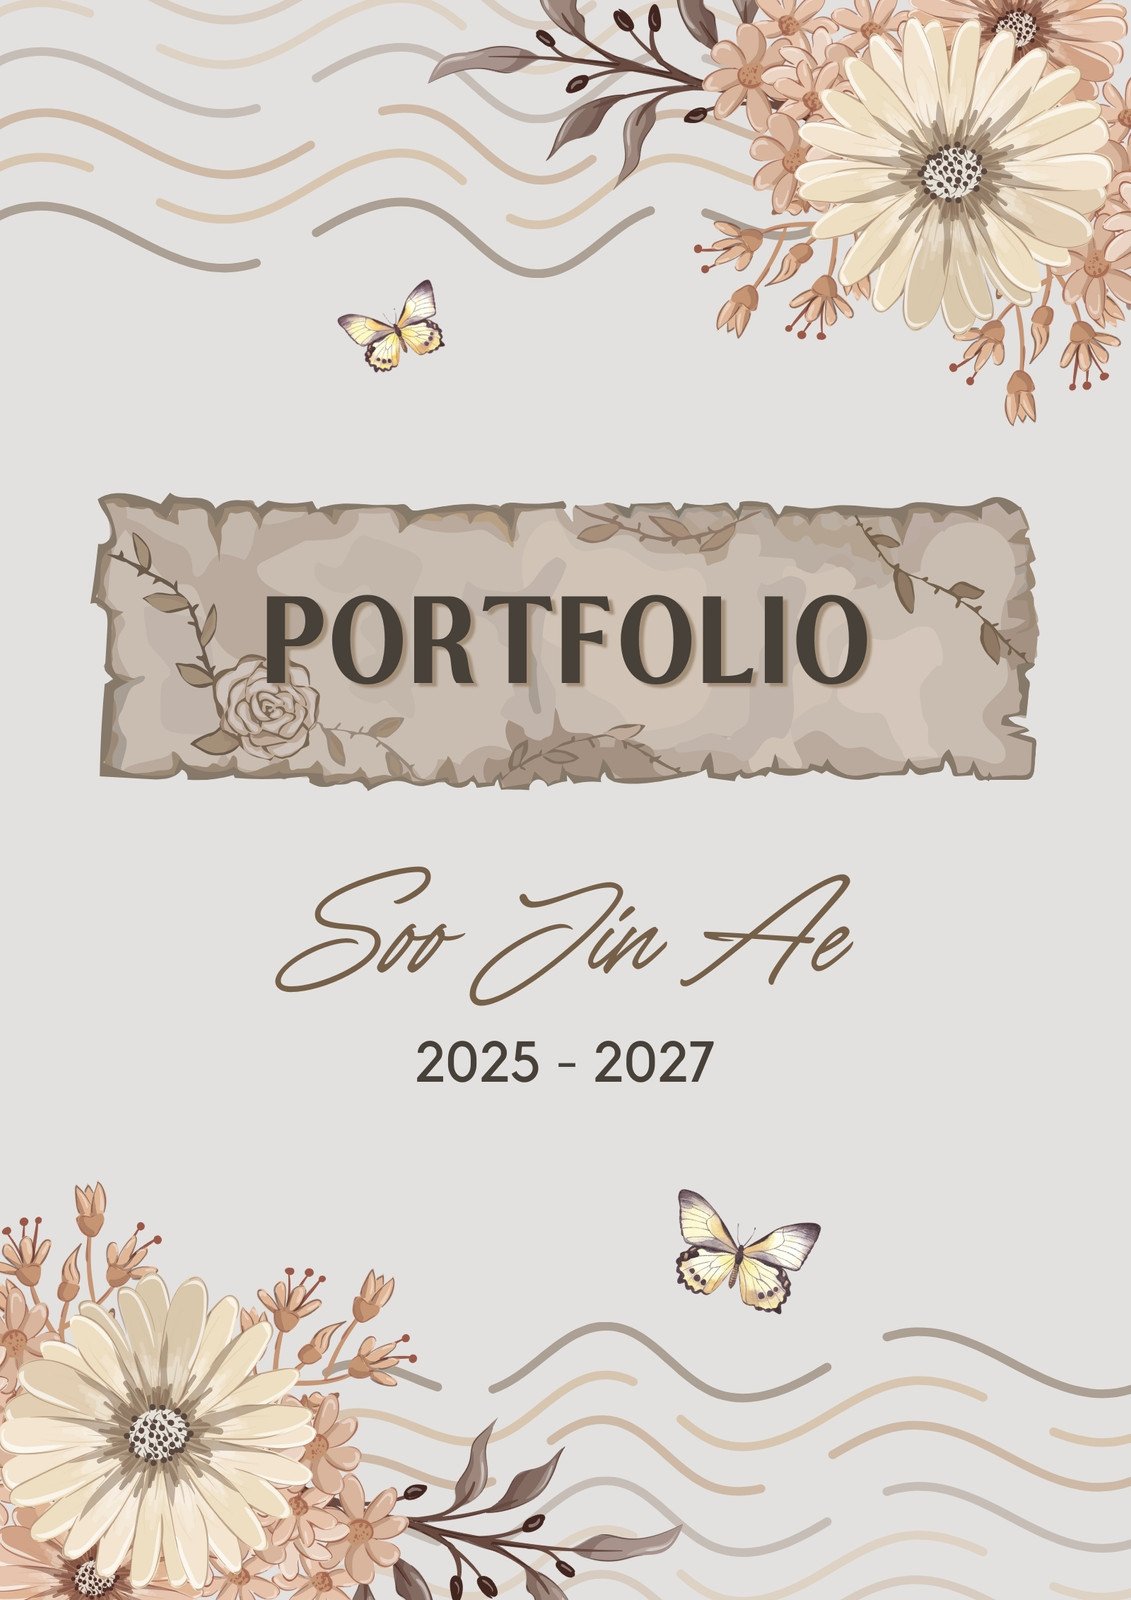 Floret designs, themes, templates and downloadable graphic